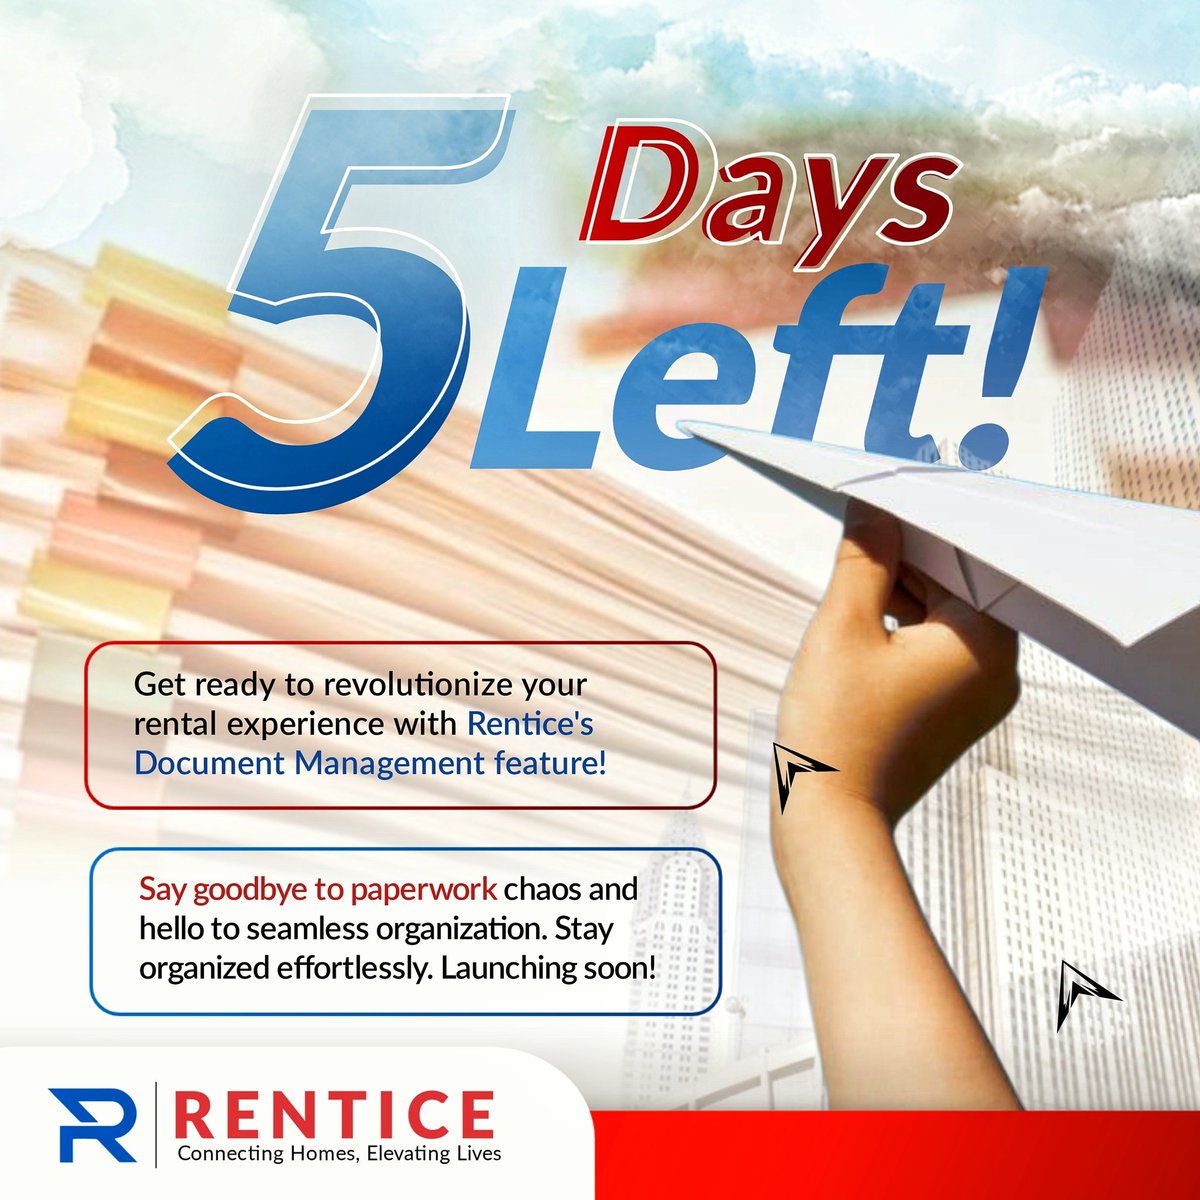 Discover how Rentice's Document Management feature can revolutionize your rental experience! Get ready to simplify your rental process and stay organized like never before. Join the live launch, check our bio for the link. #rentice #documentmanagement #organization